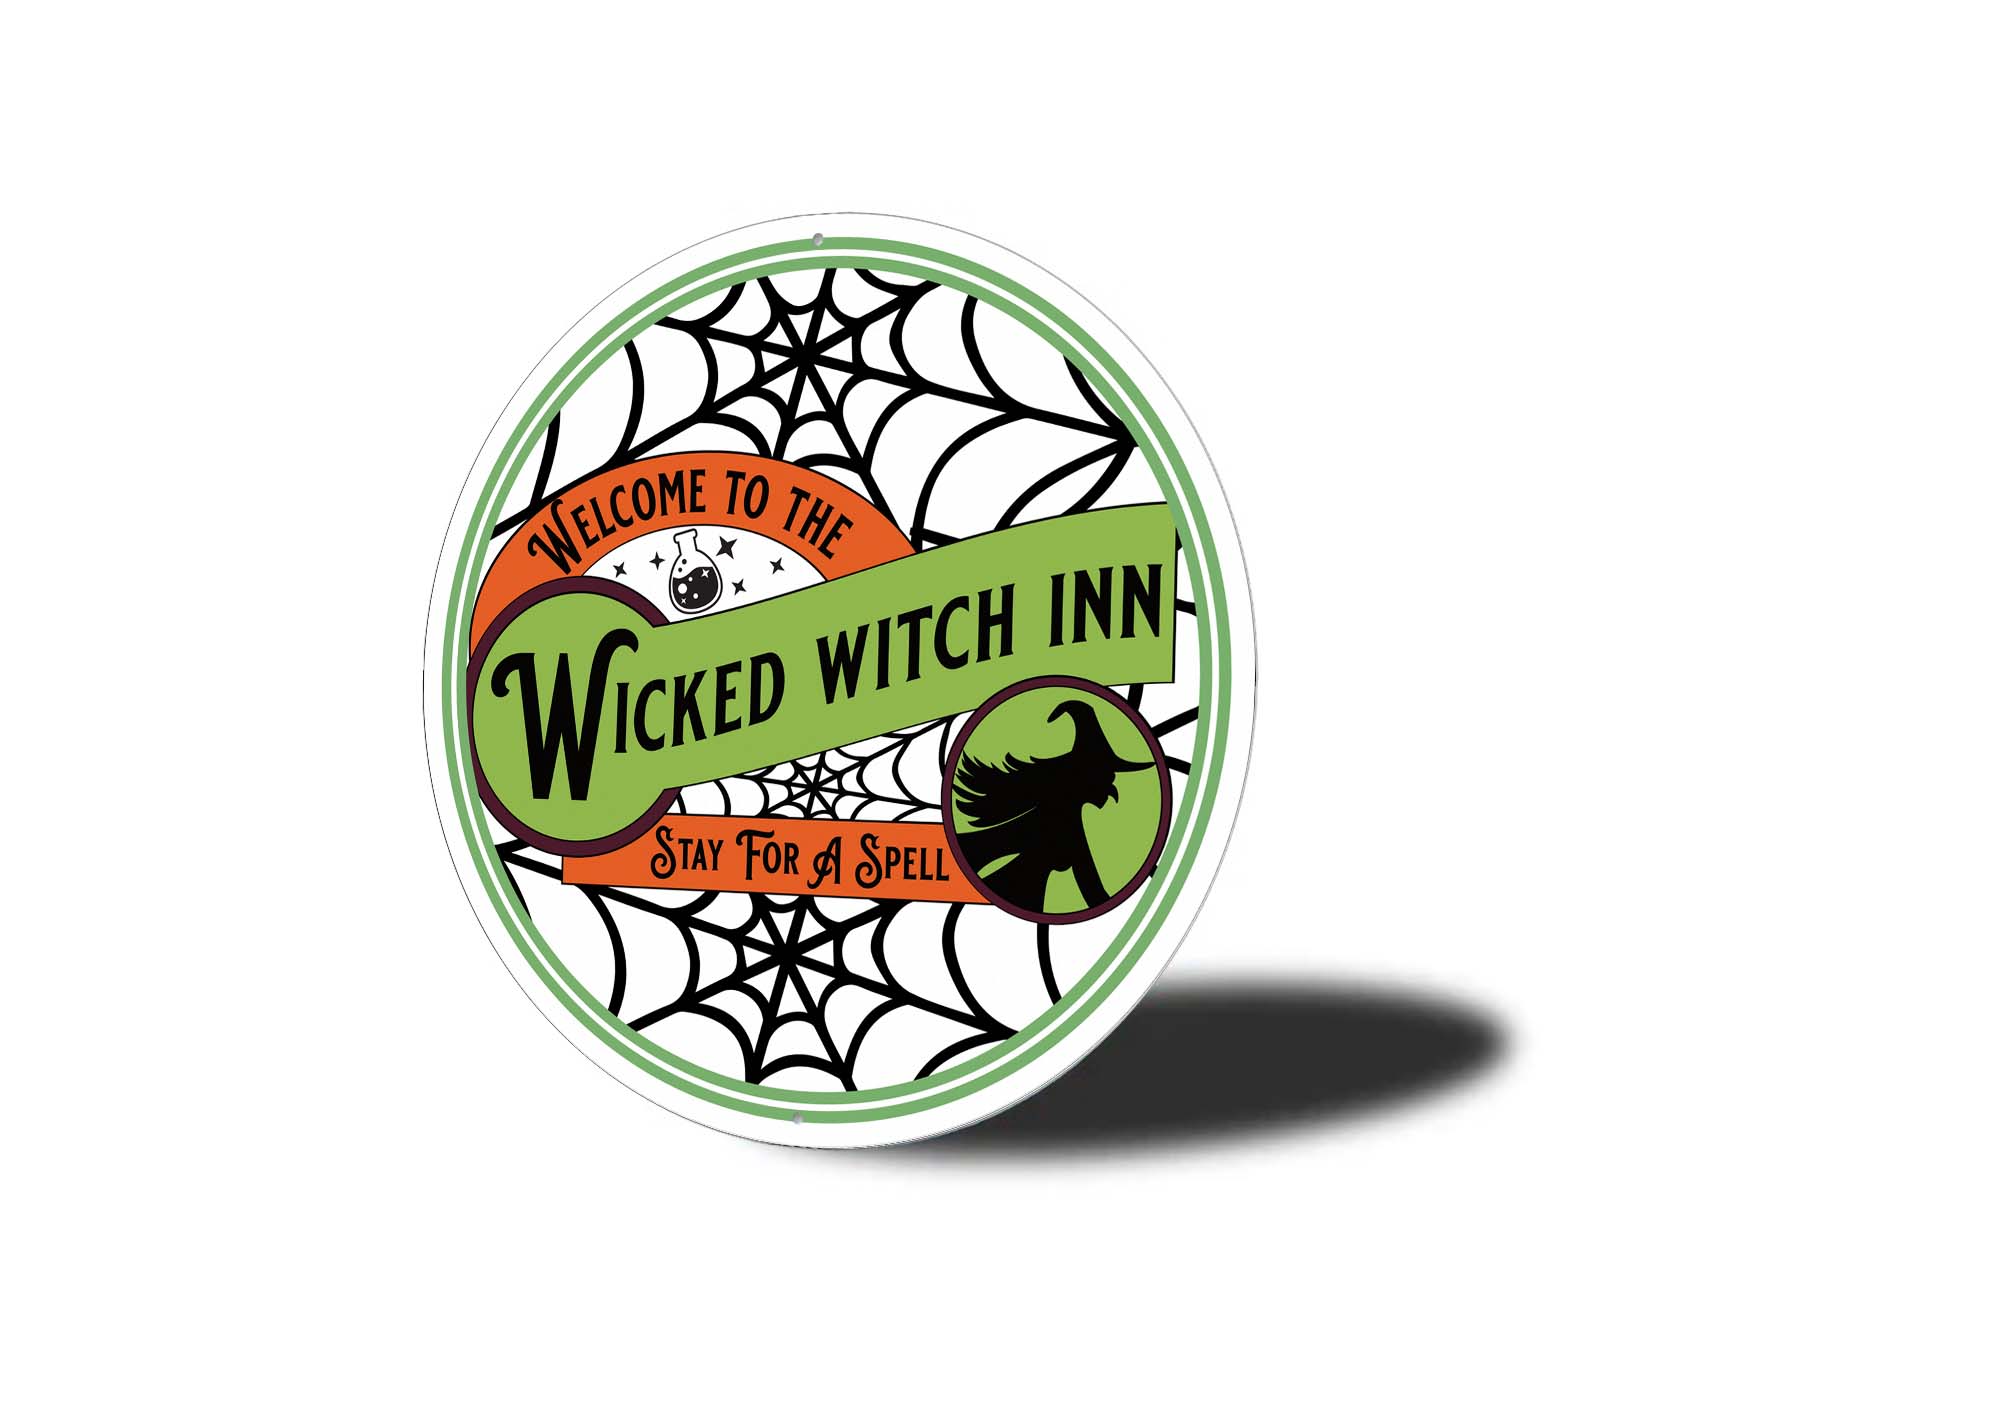 Wicked Witch Inn Spider Web Halloween Sign